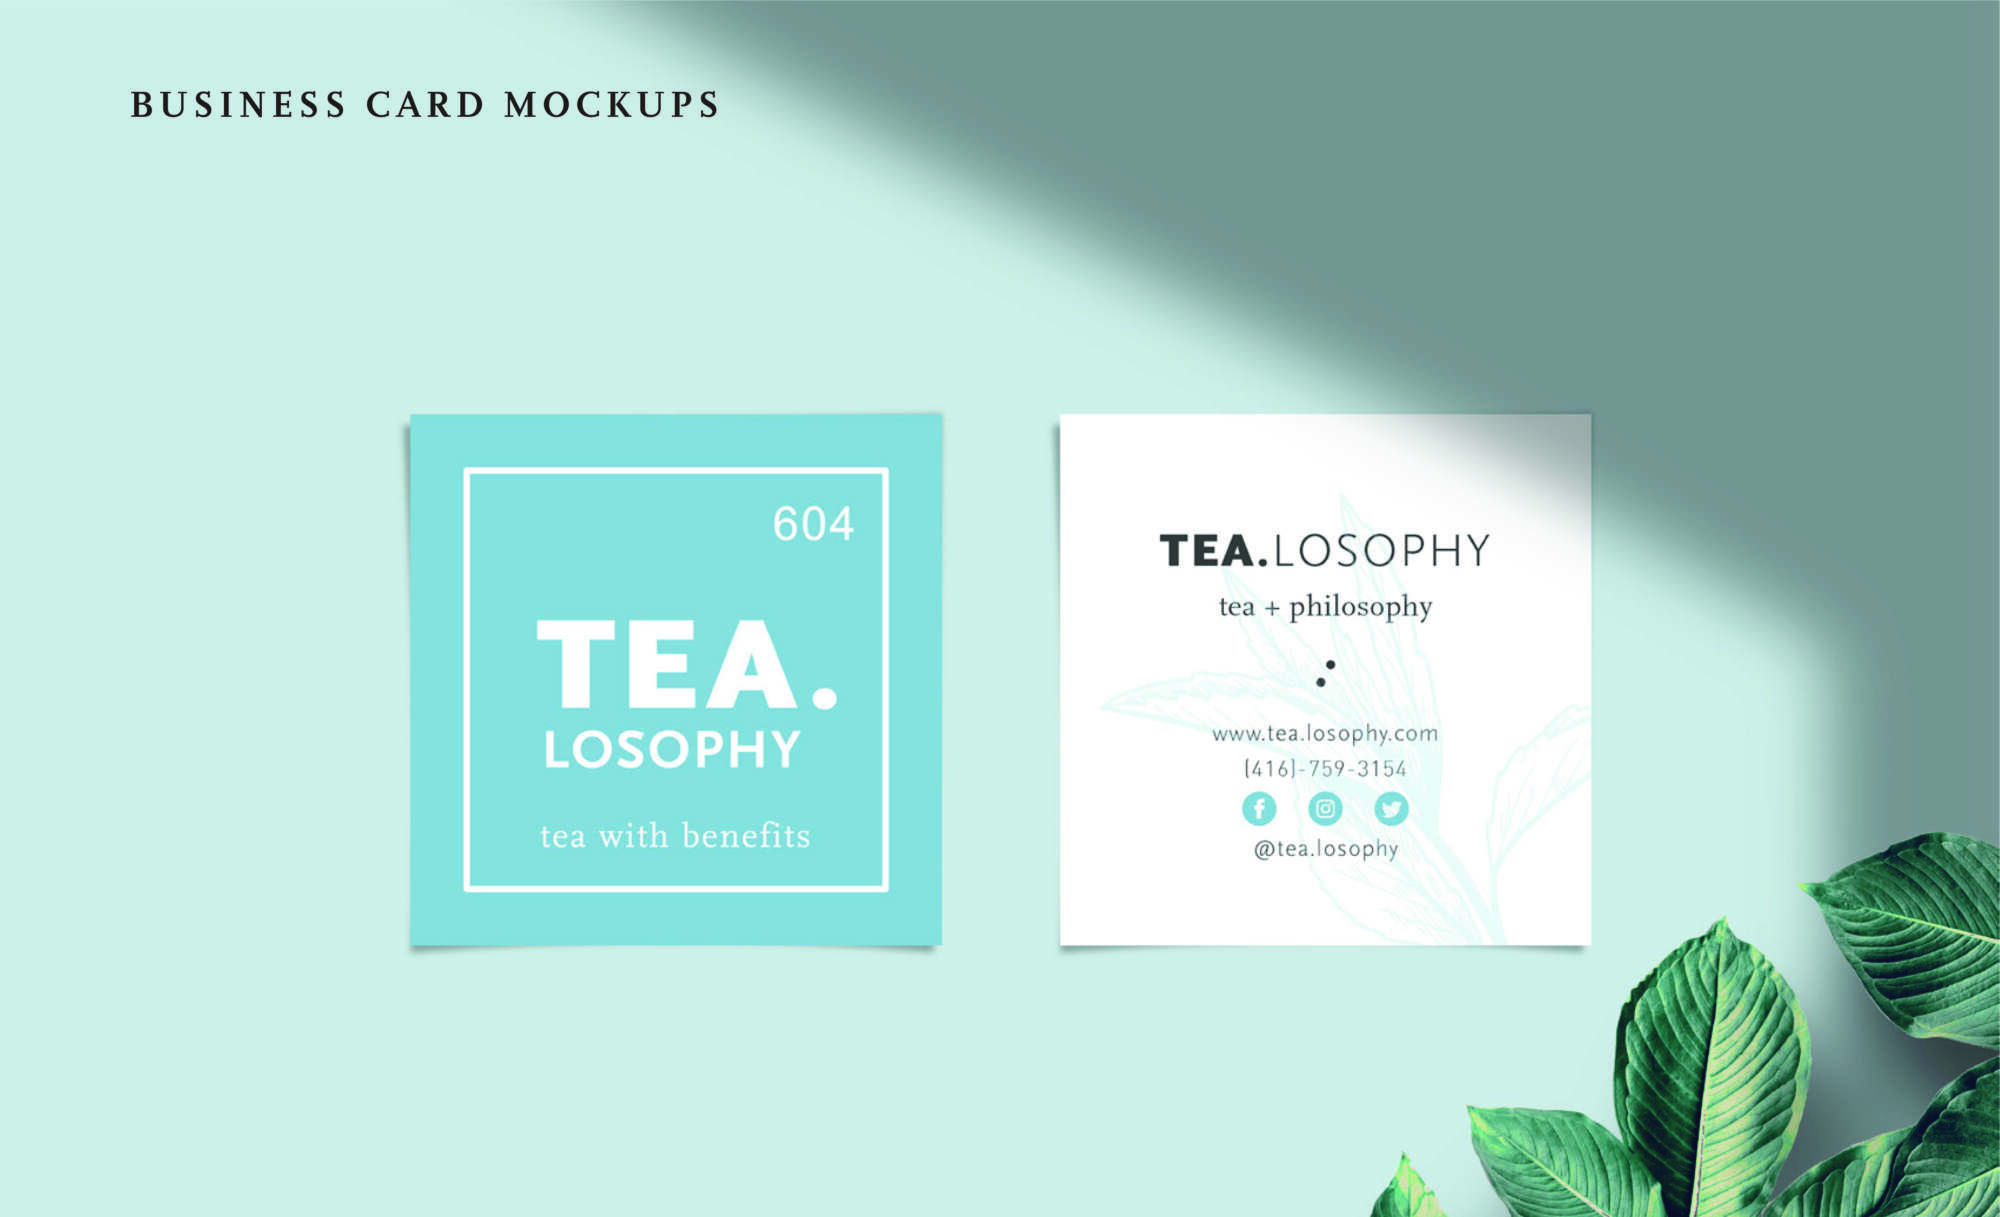 Tae.Losophy - Business Card